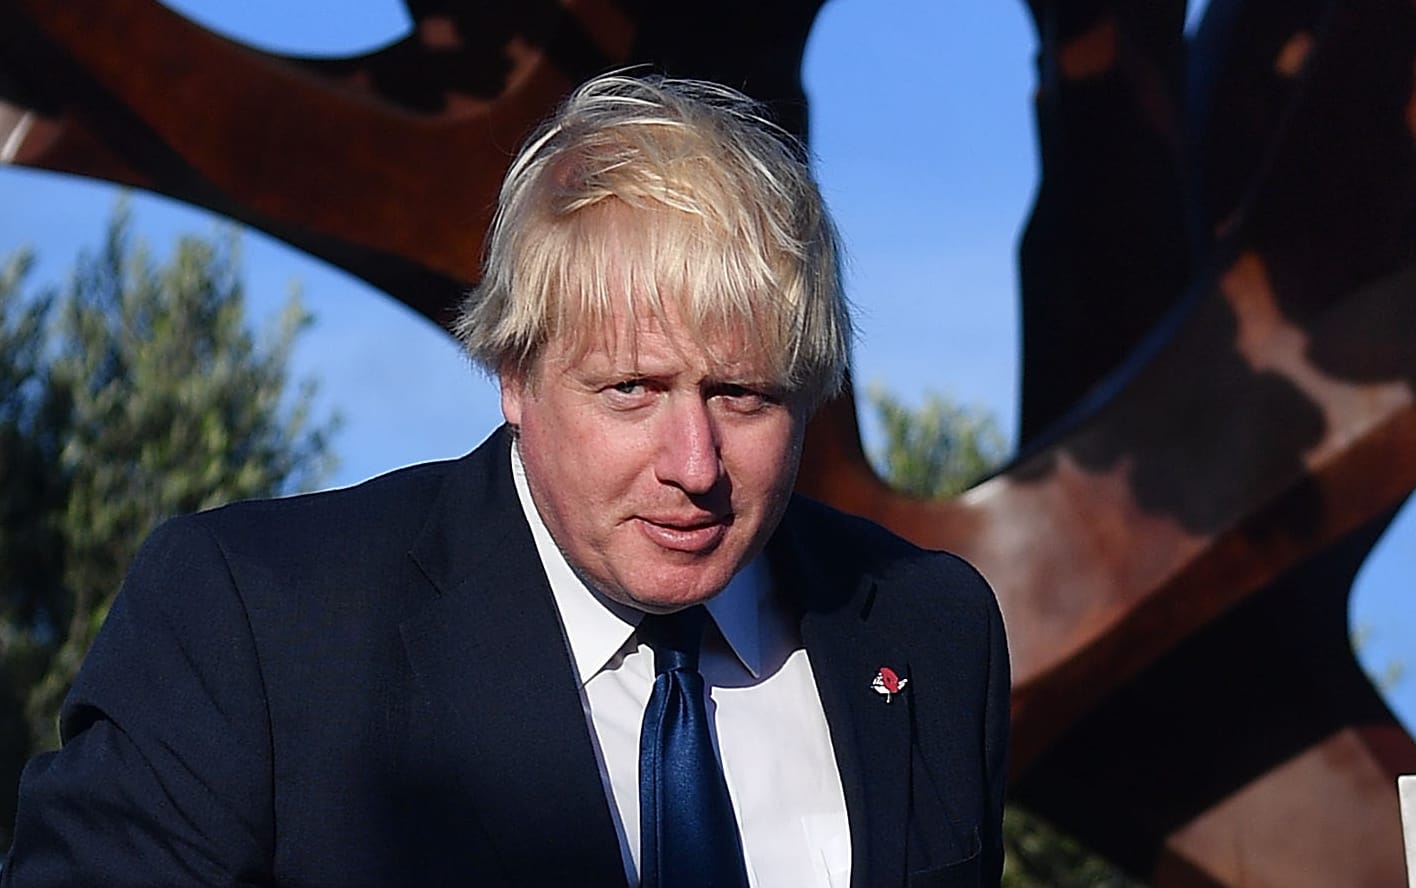 Boris Johnson in front of the Weta Workshop designed statue at the Pukeahu National War Memorial Park.